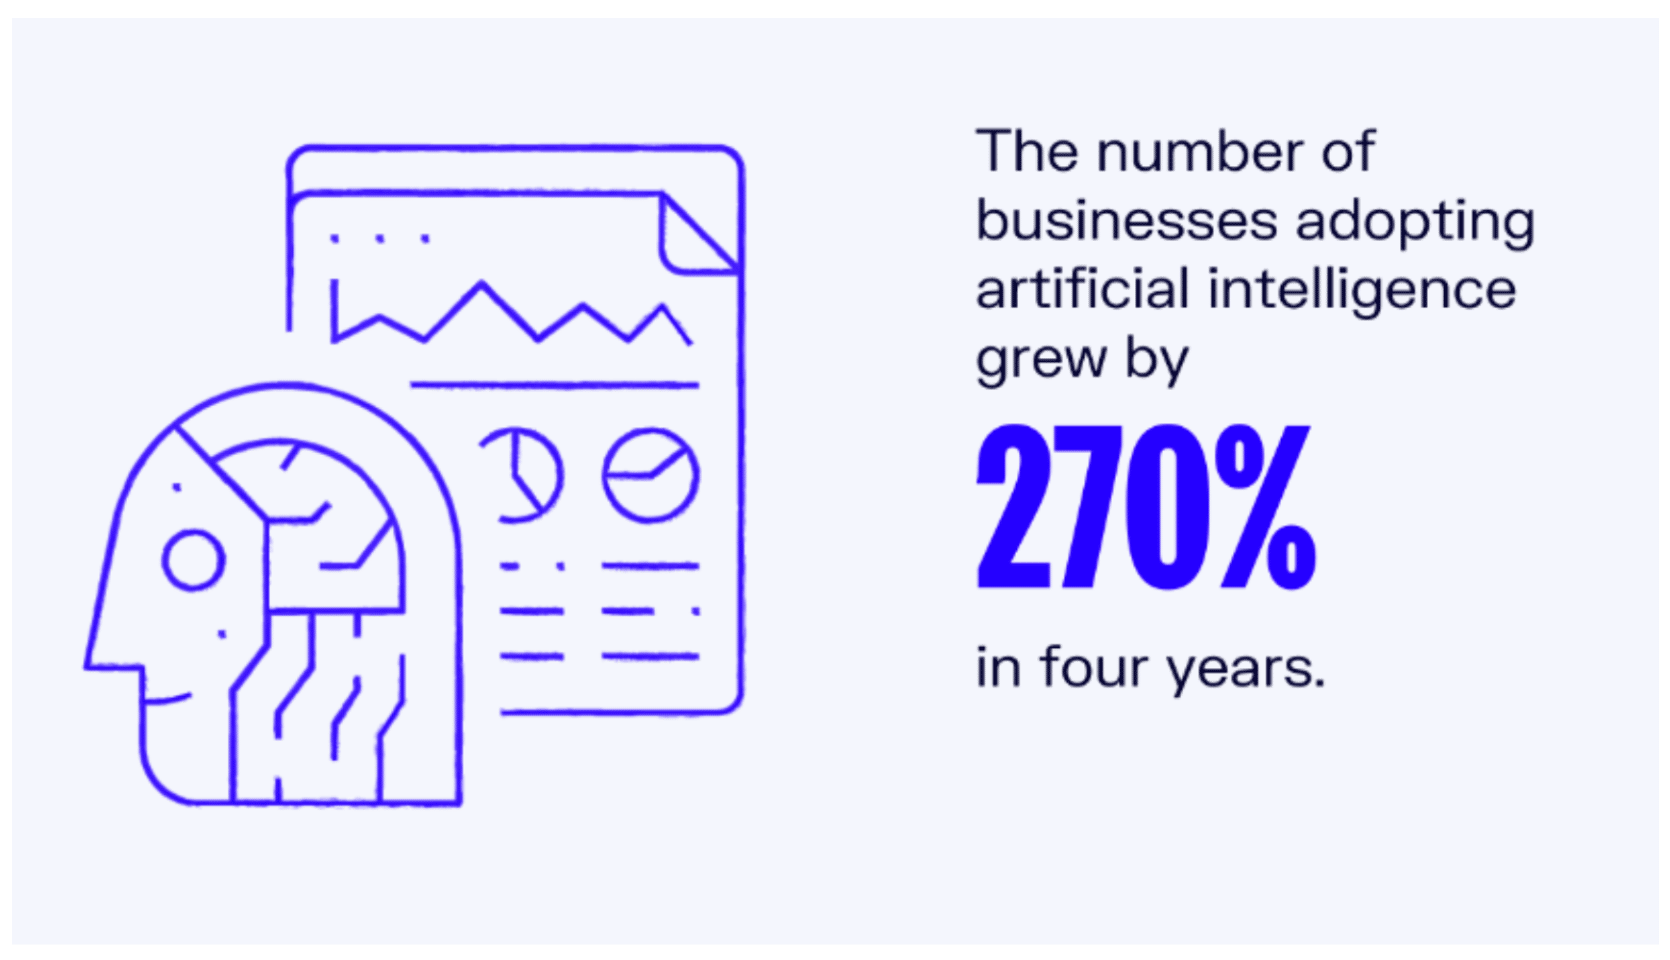 image shows statistic of 270% growth in businesses using artificial intellige